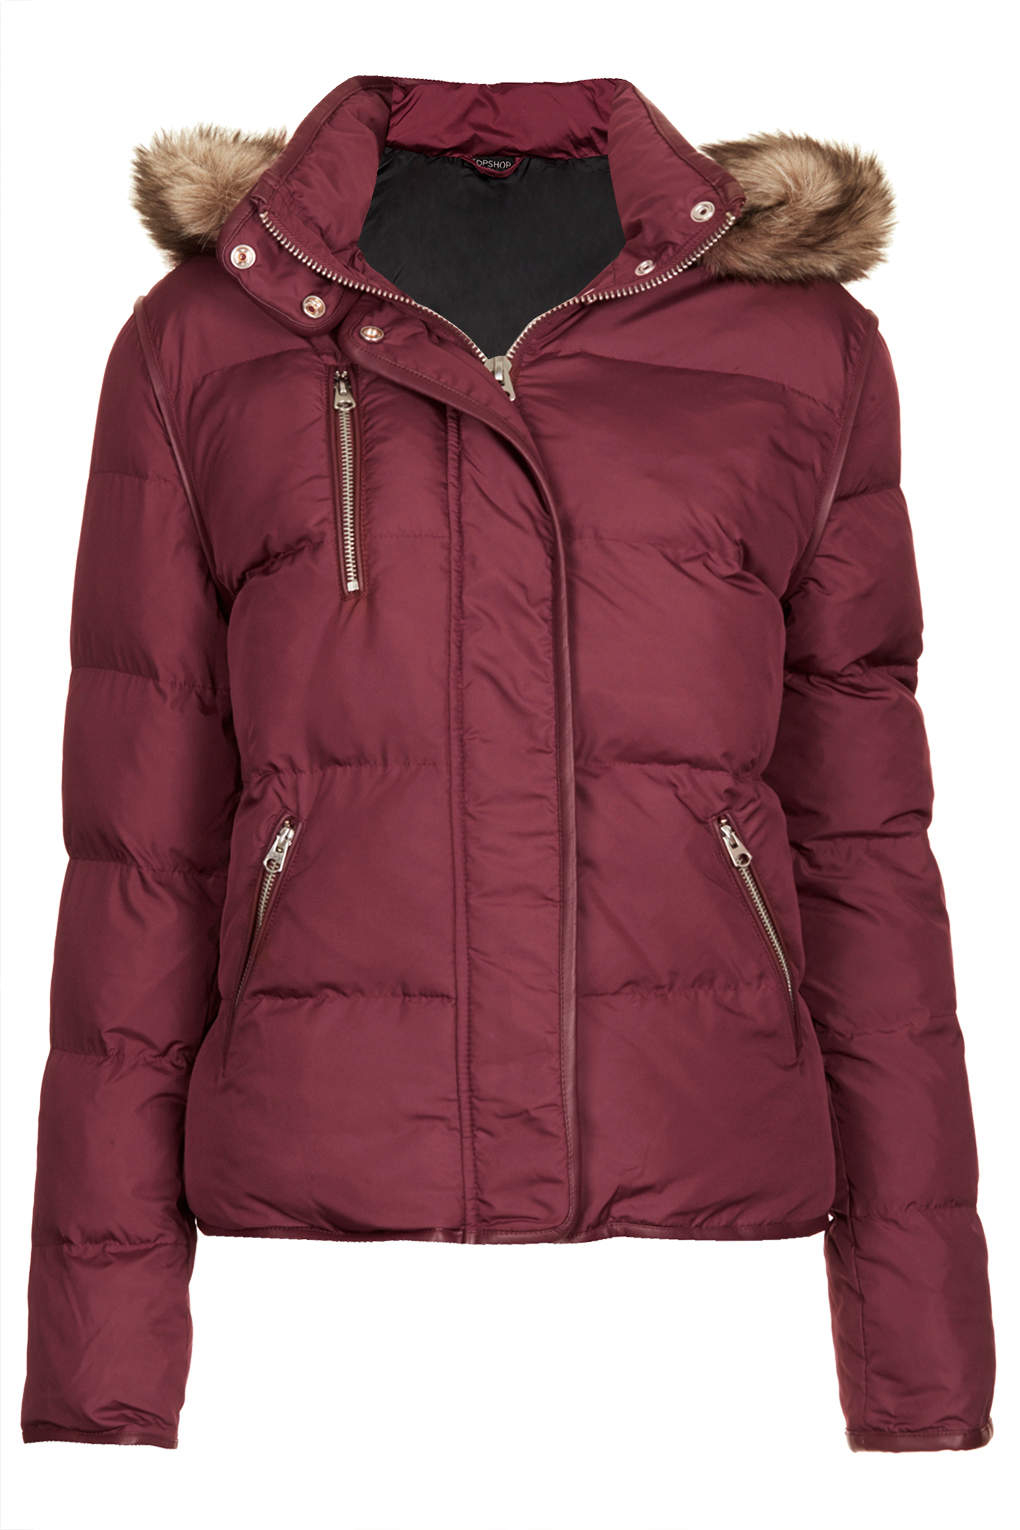 TOPSHOP Padded Puffer Jacket in Berry Red (Red) - Lyst